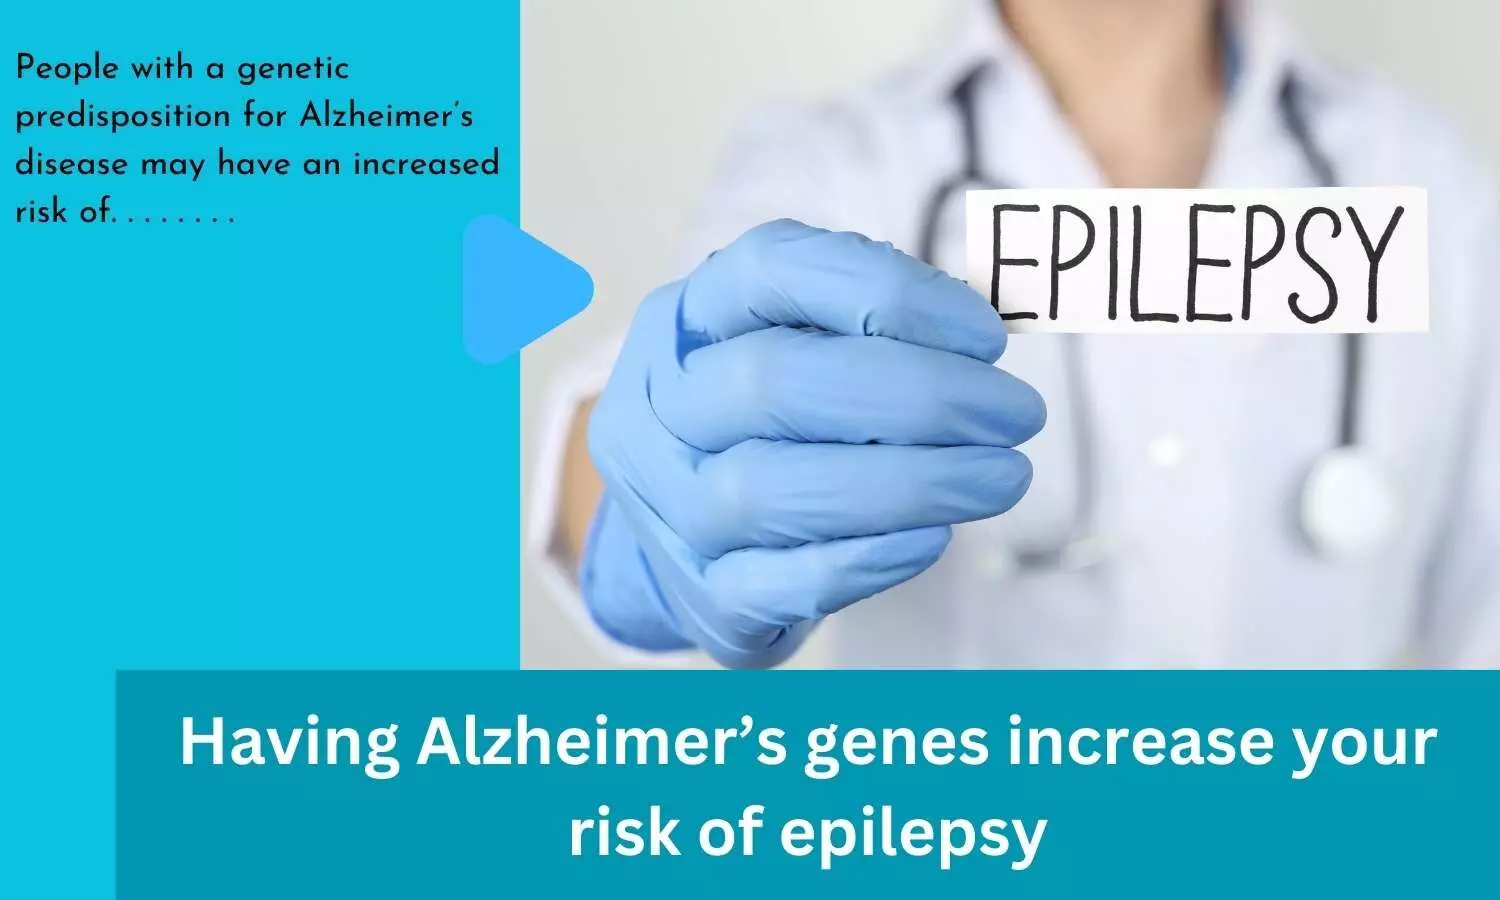 Having Alzheimers genes increase your risk of epilepsy